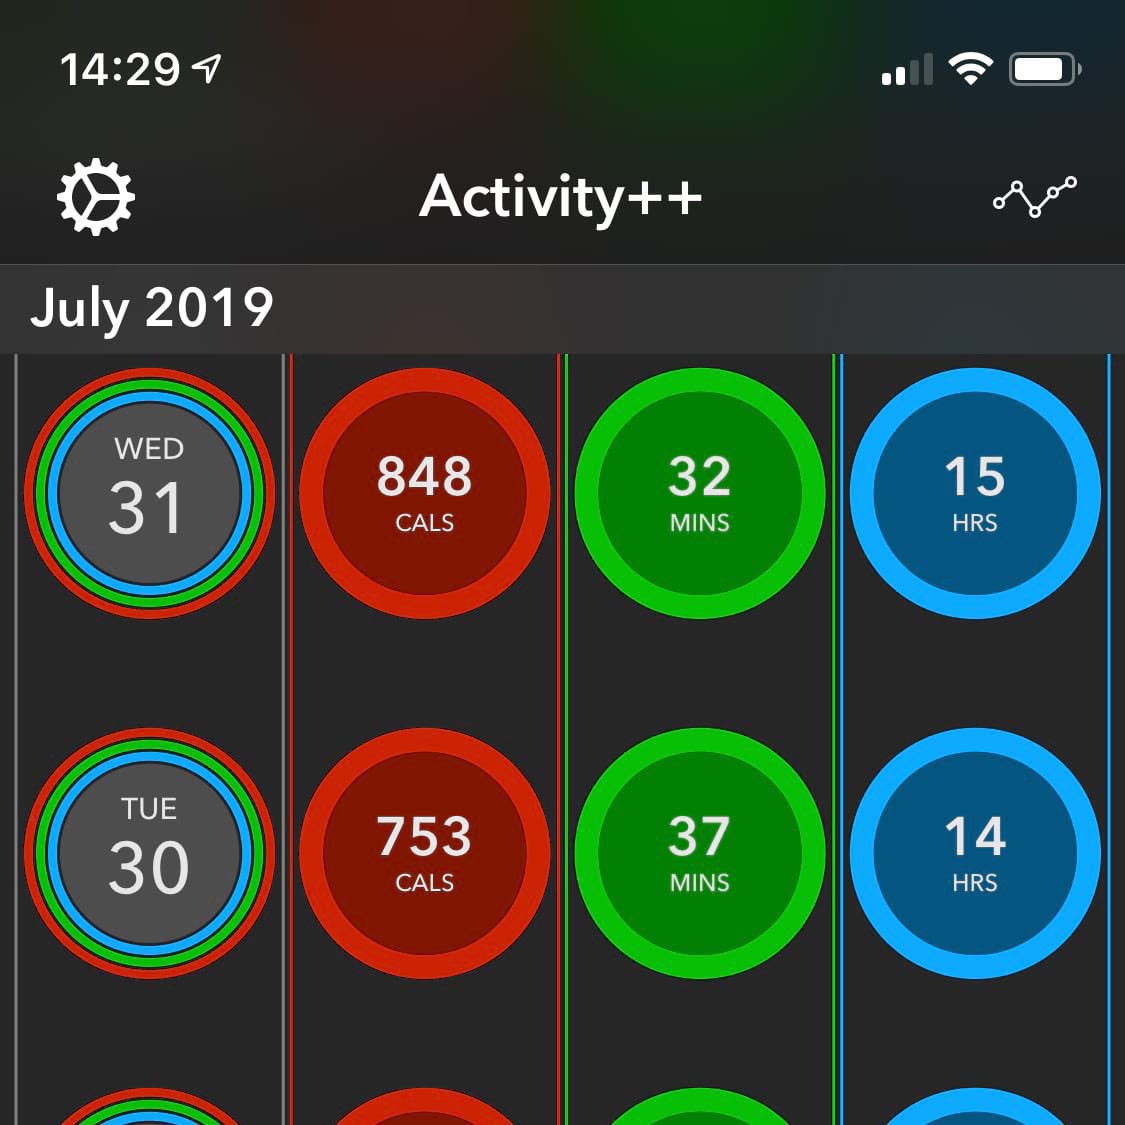 Showing activity rings in Activity++